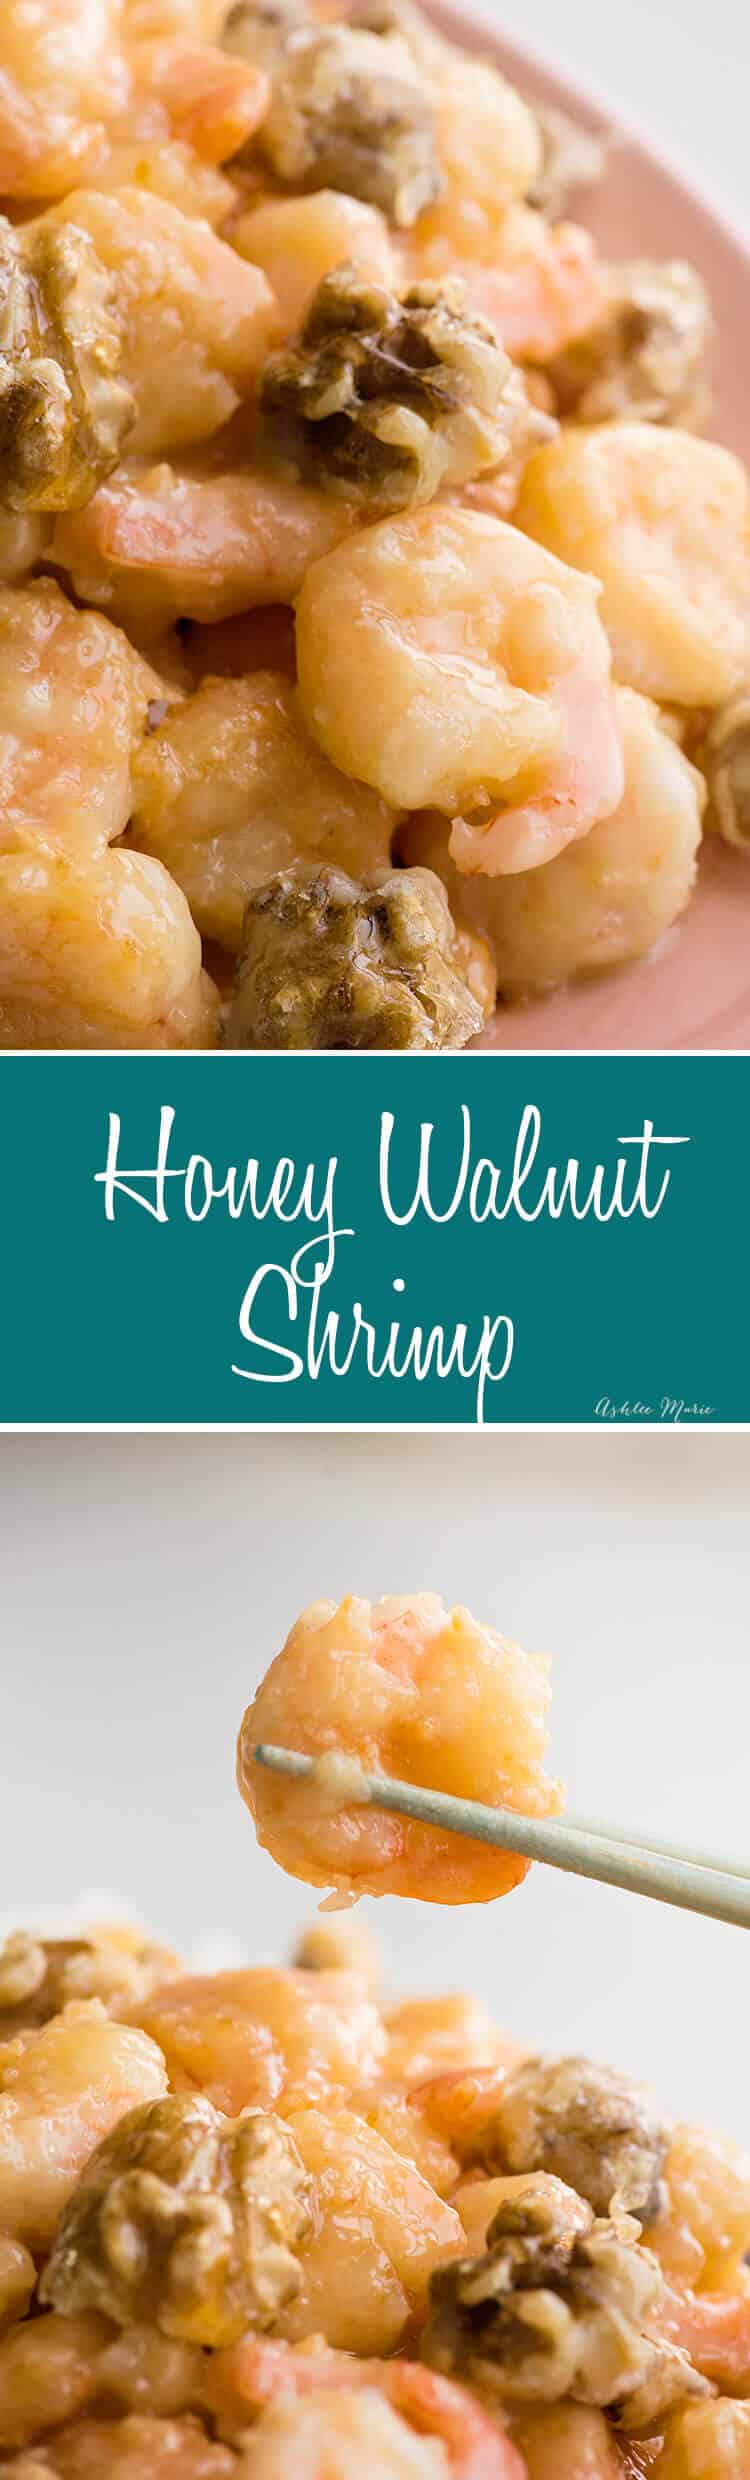 candied walnuts, creamy sauce and fried breaded shrimp this honey walnut shrimp is easy to make and delicious - recipe and video tutorial